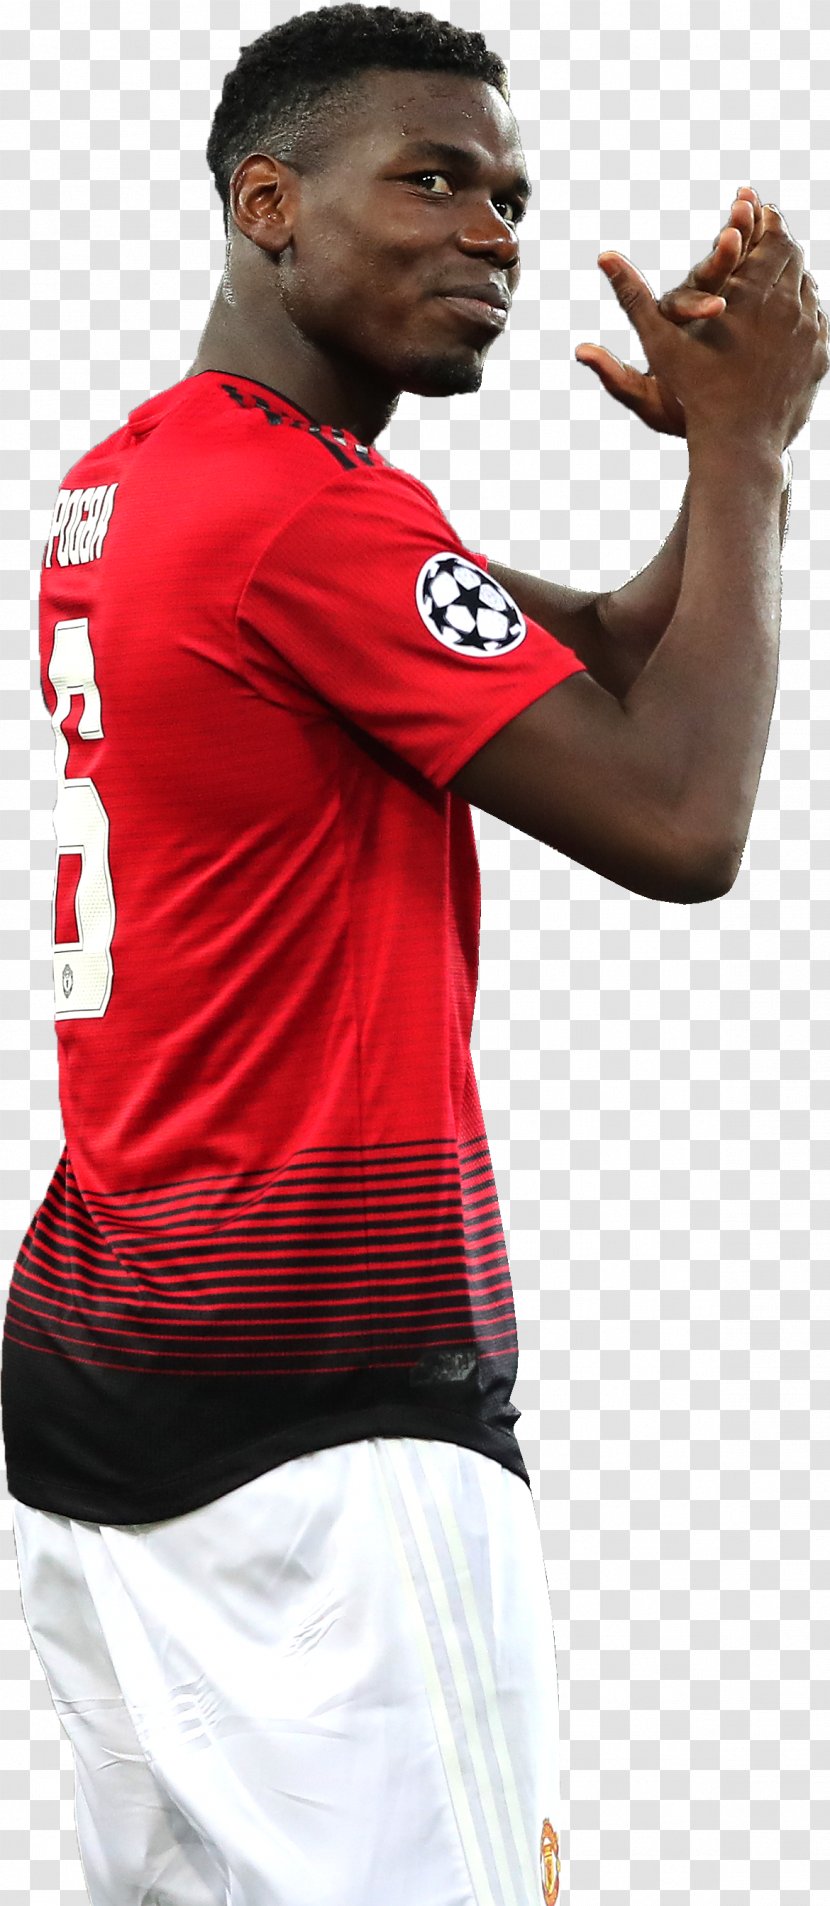 Cristiano Ronaldo - Jersey - Elbow Muscle Transparent PNG